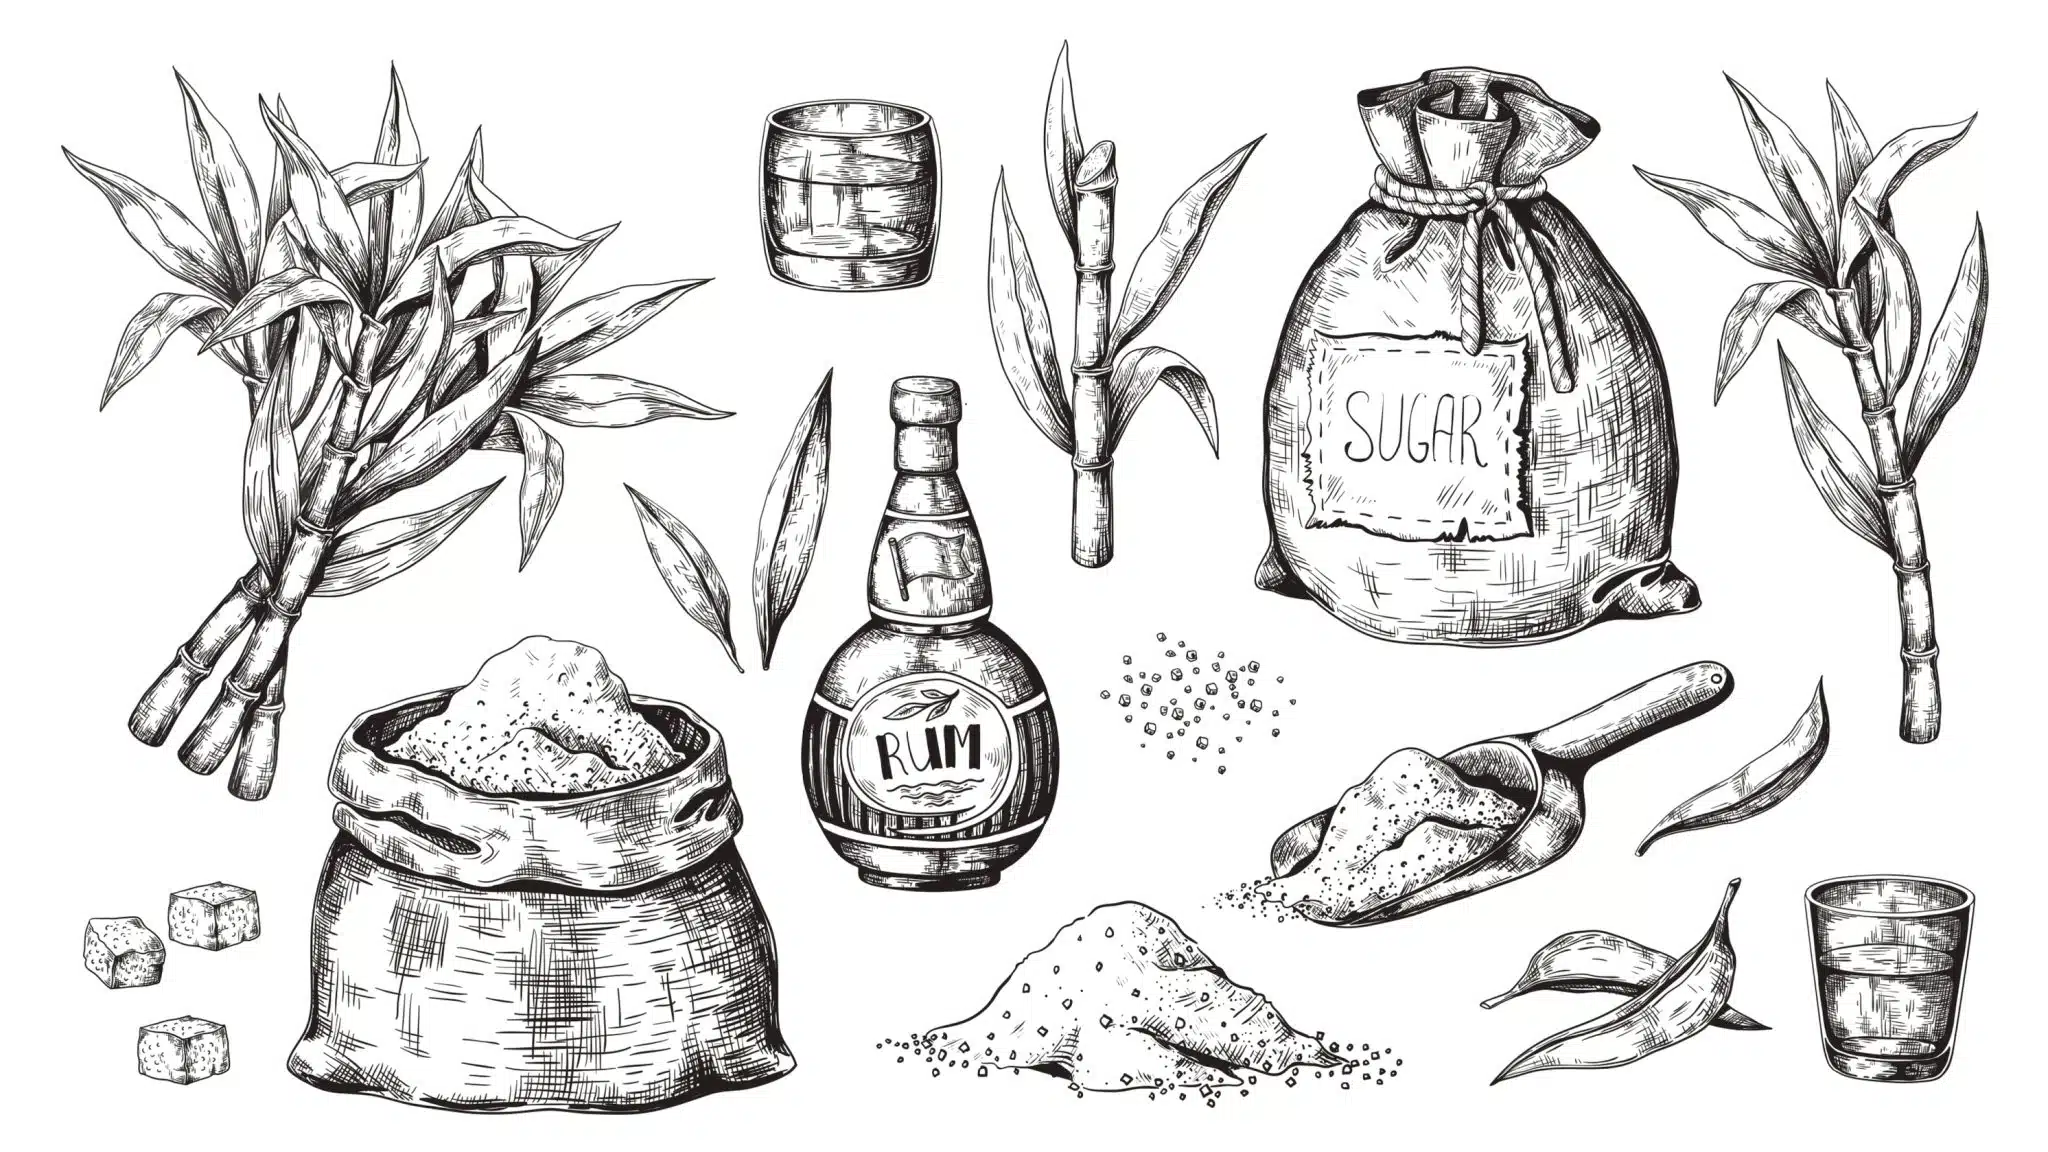 A sketch showing parts of rum making: sugarcane plants, a glass and bottle of rum, sugar bag, scoop of sugar, and loose sugar cubes.